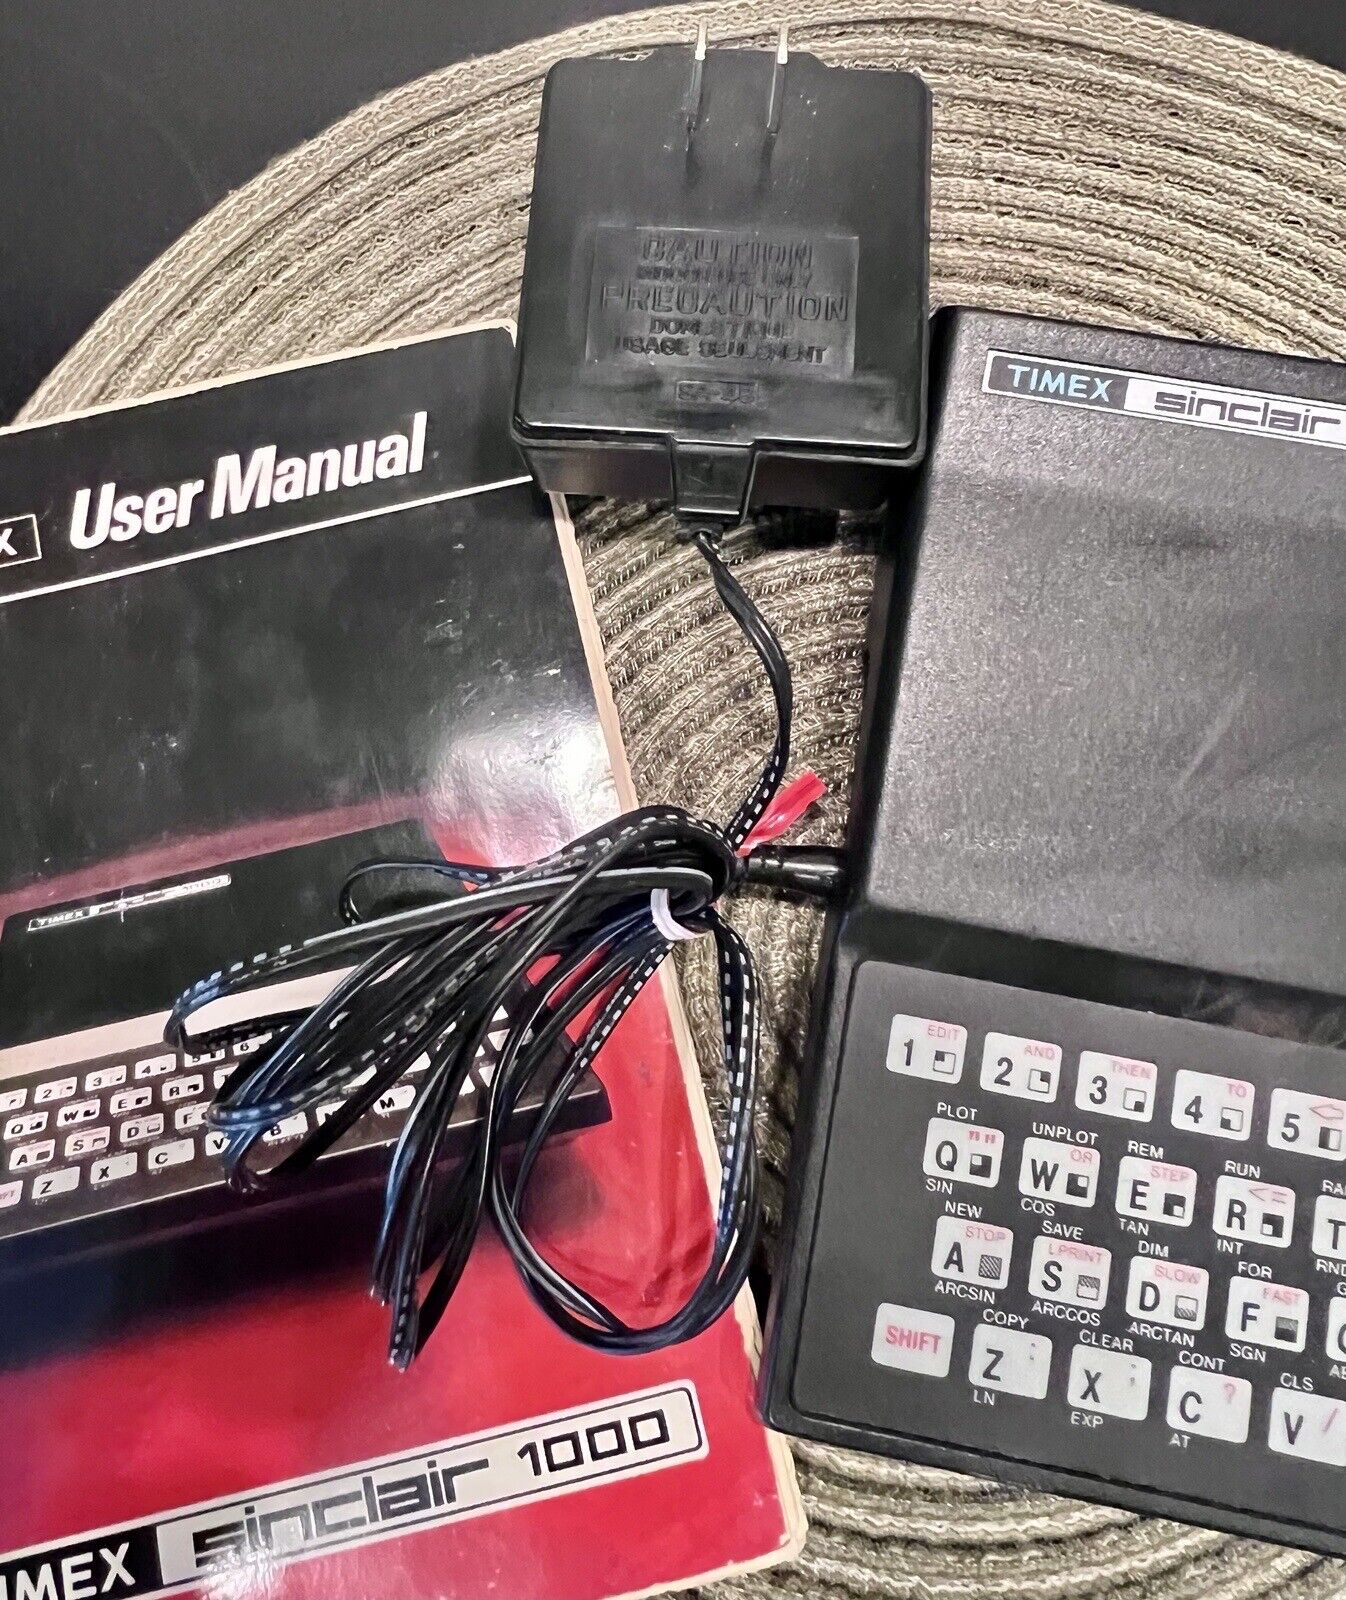 Vintage Timex Sinclair 1000 Home Computer Manuals 16K RAM Untested